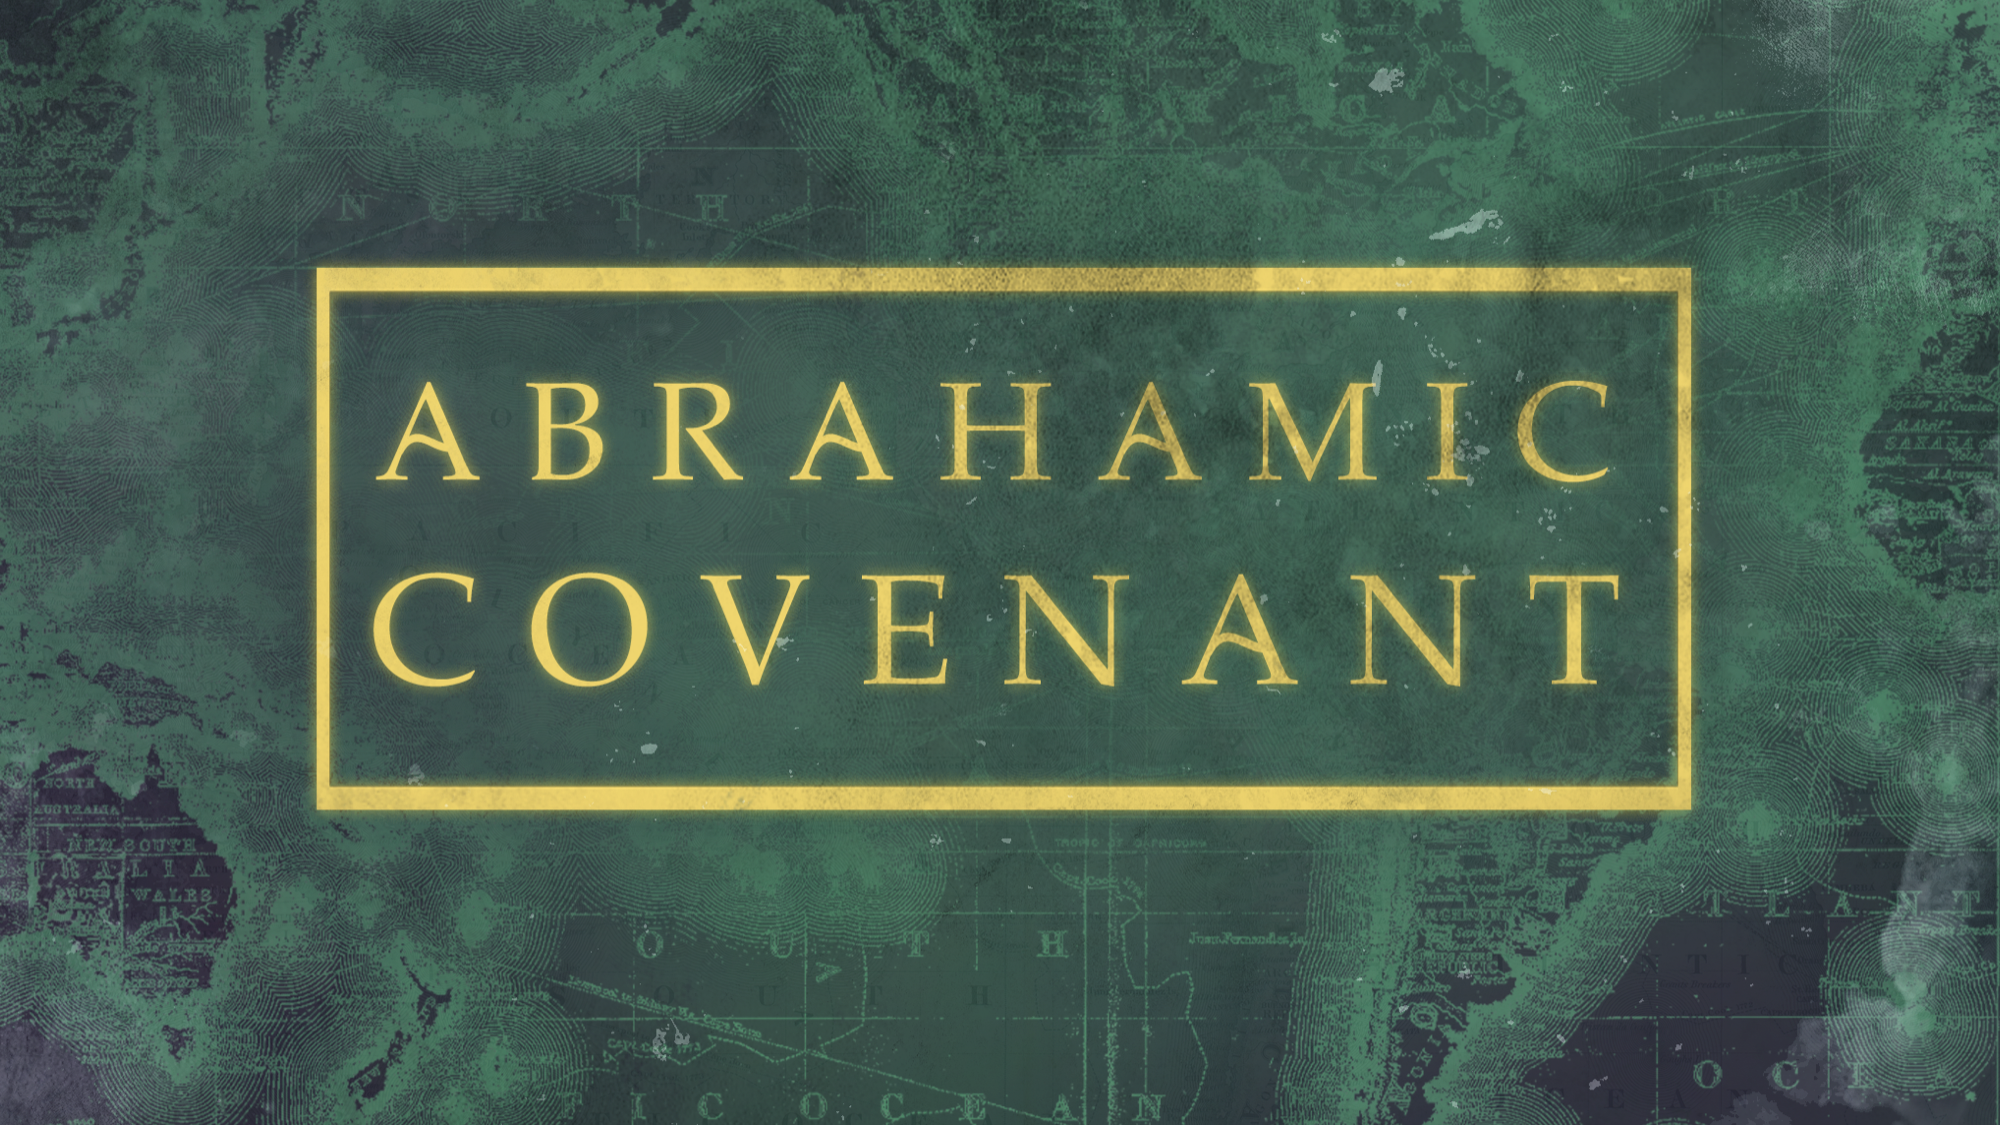 The Abrahamic Covenant Image